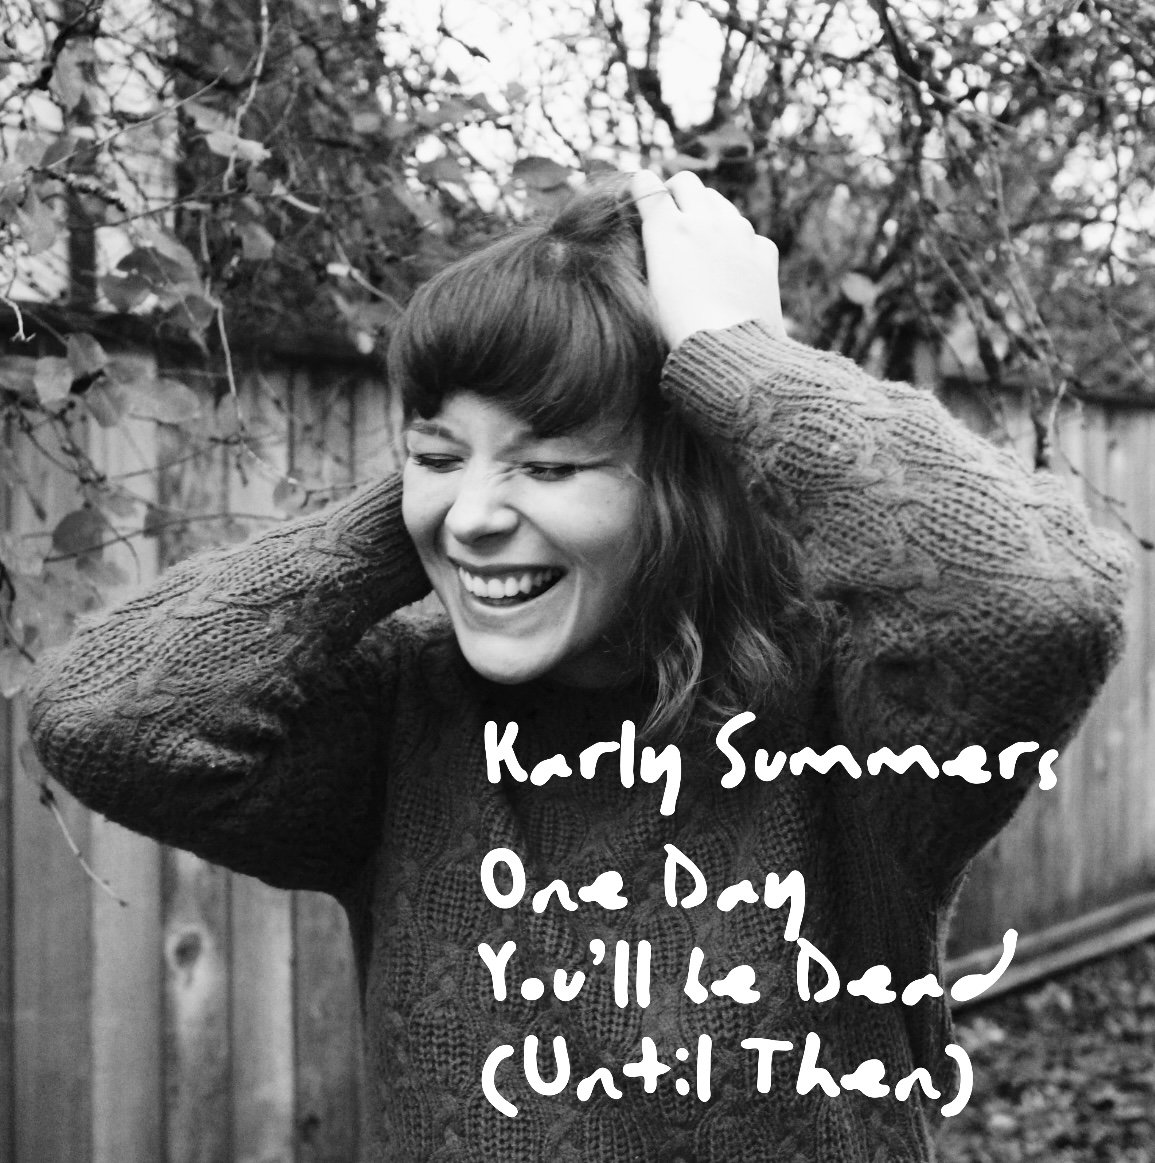 One Day You'll Be Dead by Karly Summers